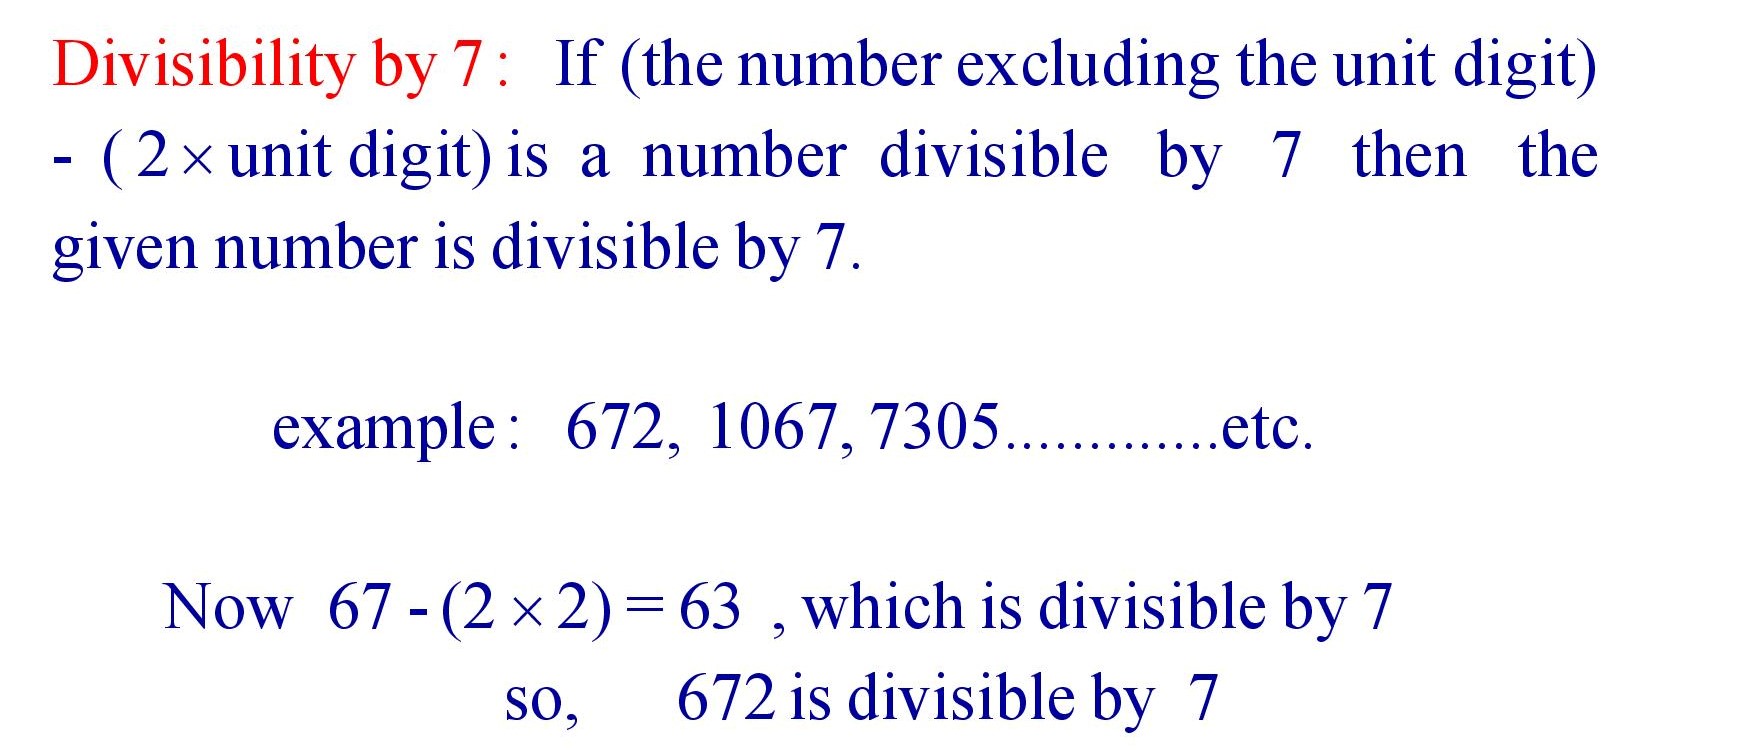 Divisibility by 7